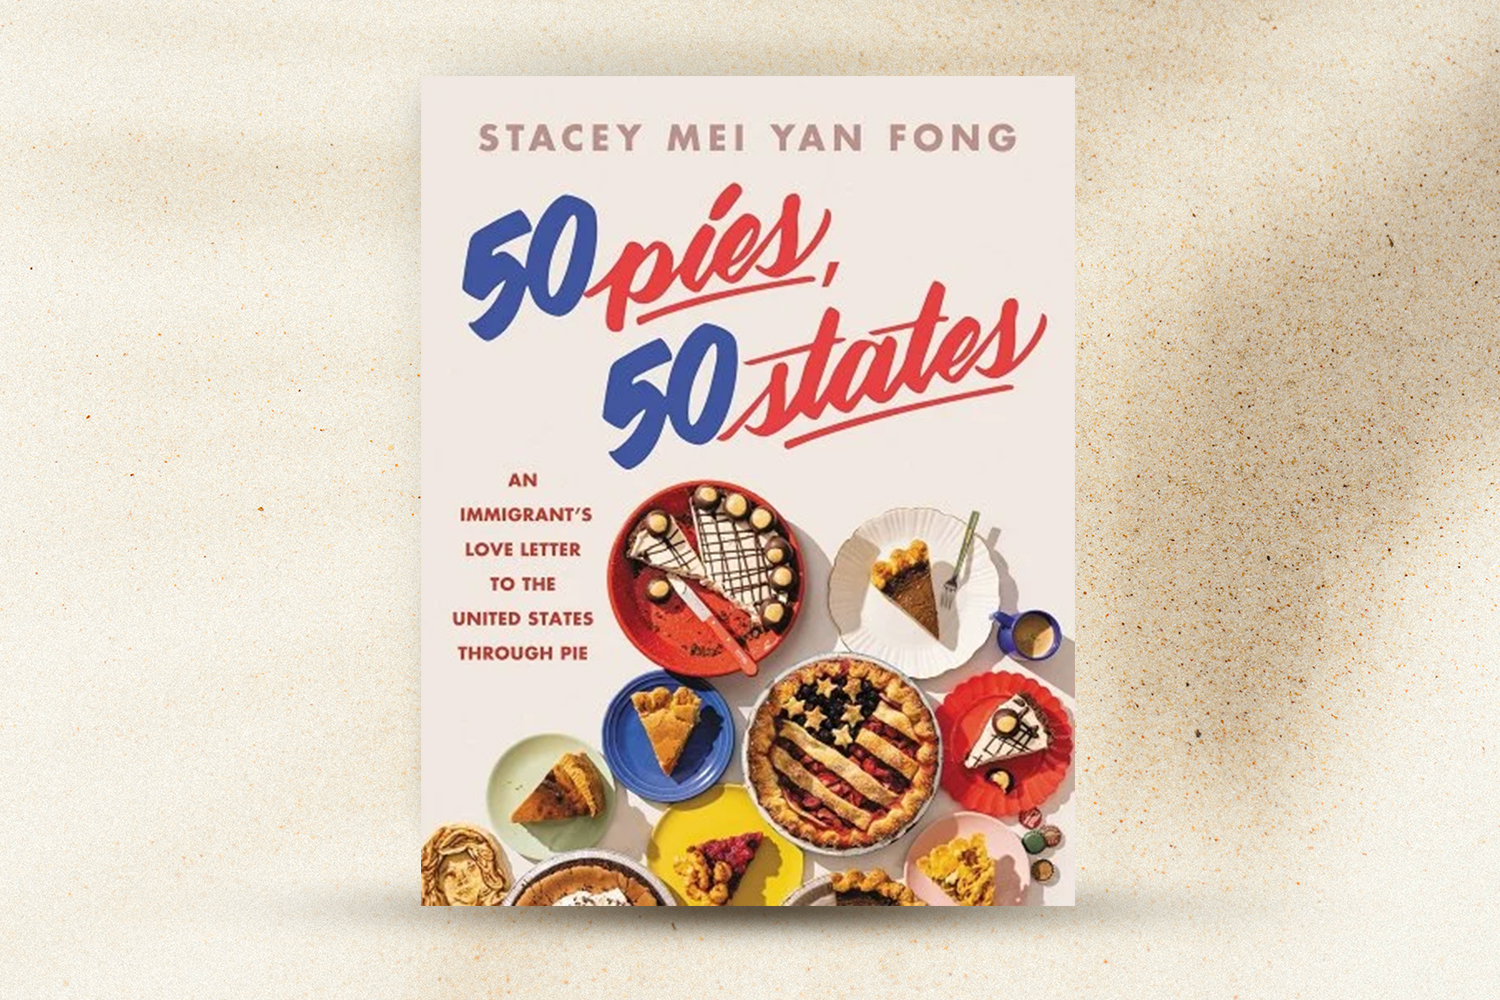 "50 Pies 50 States" cover